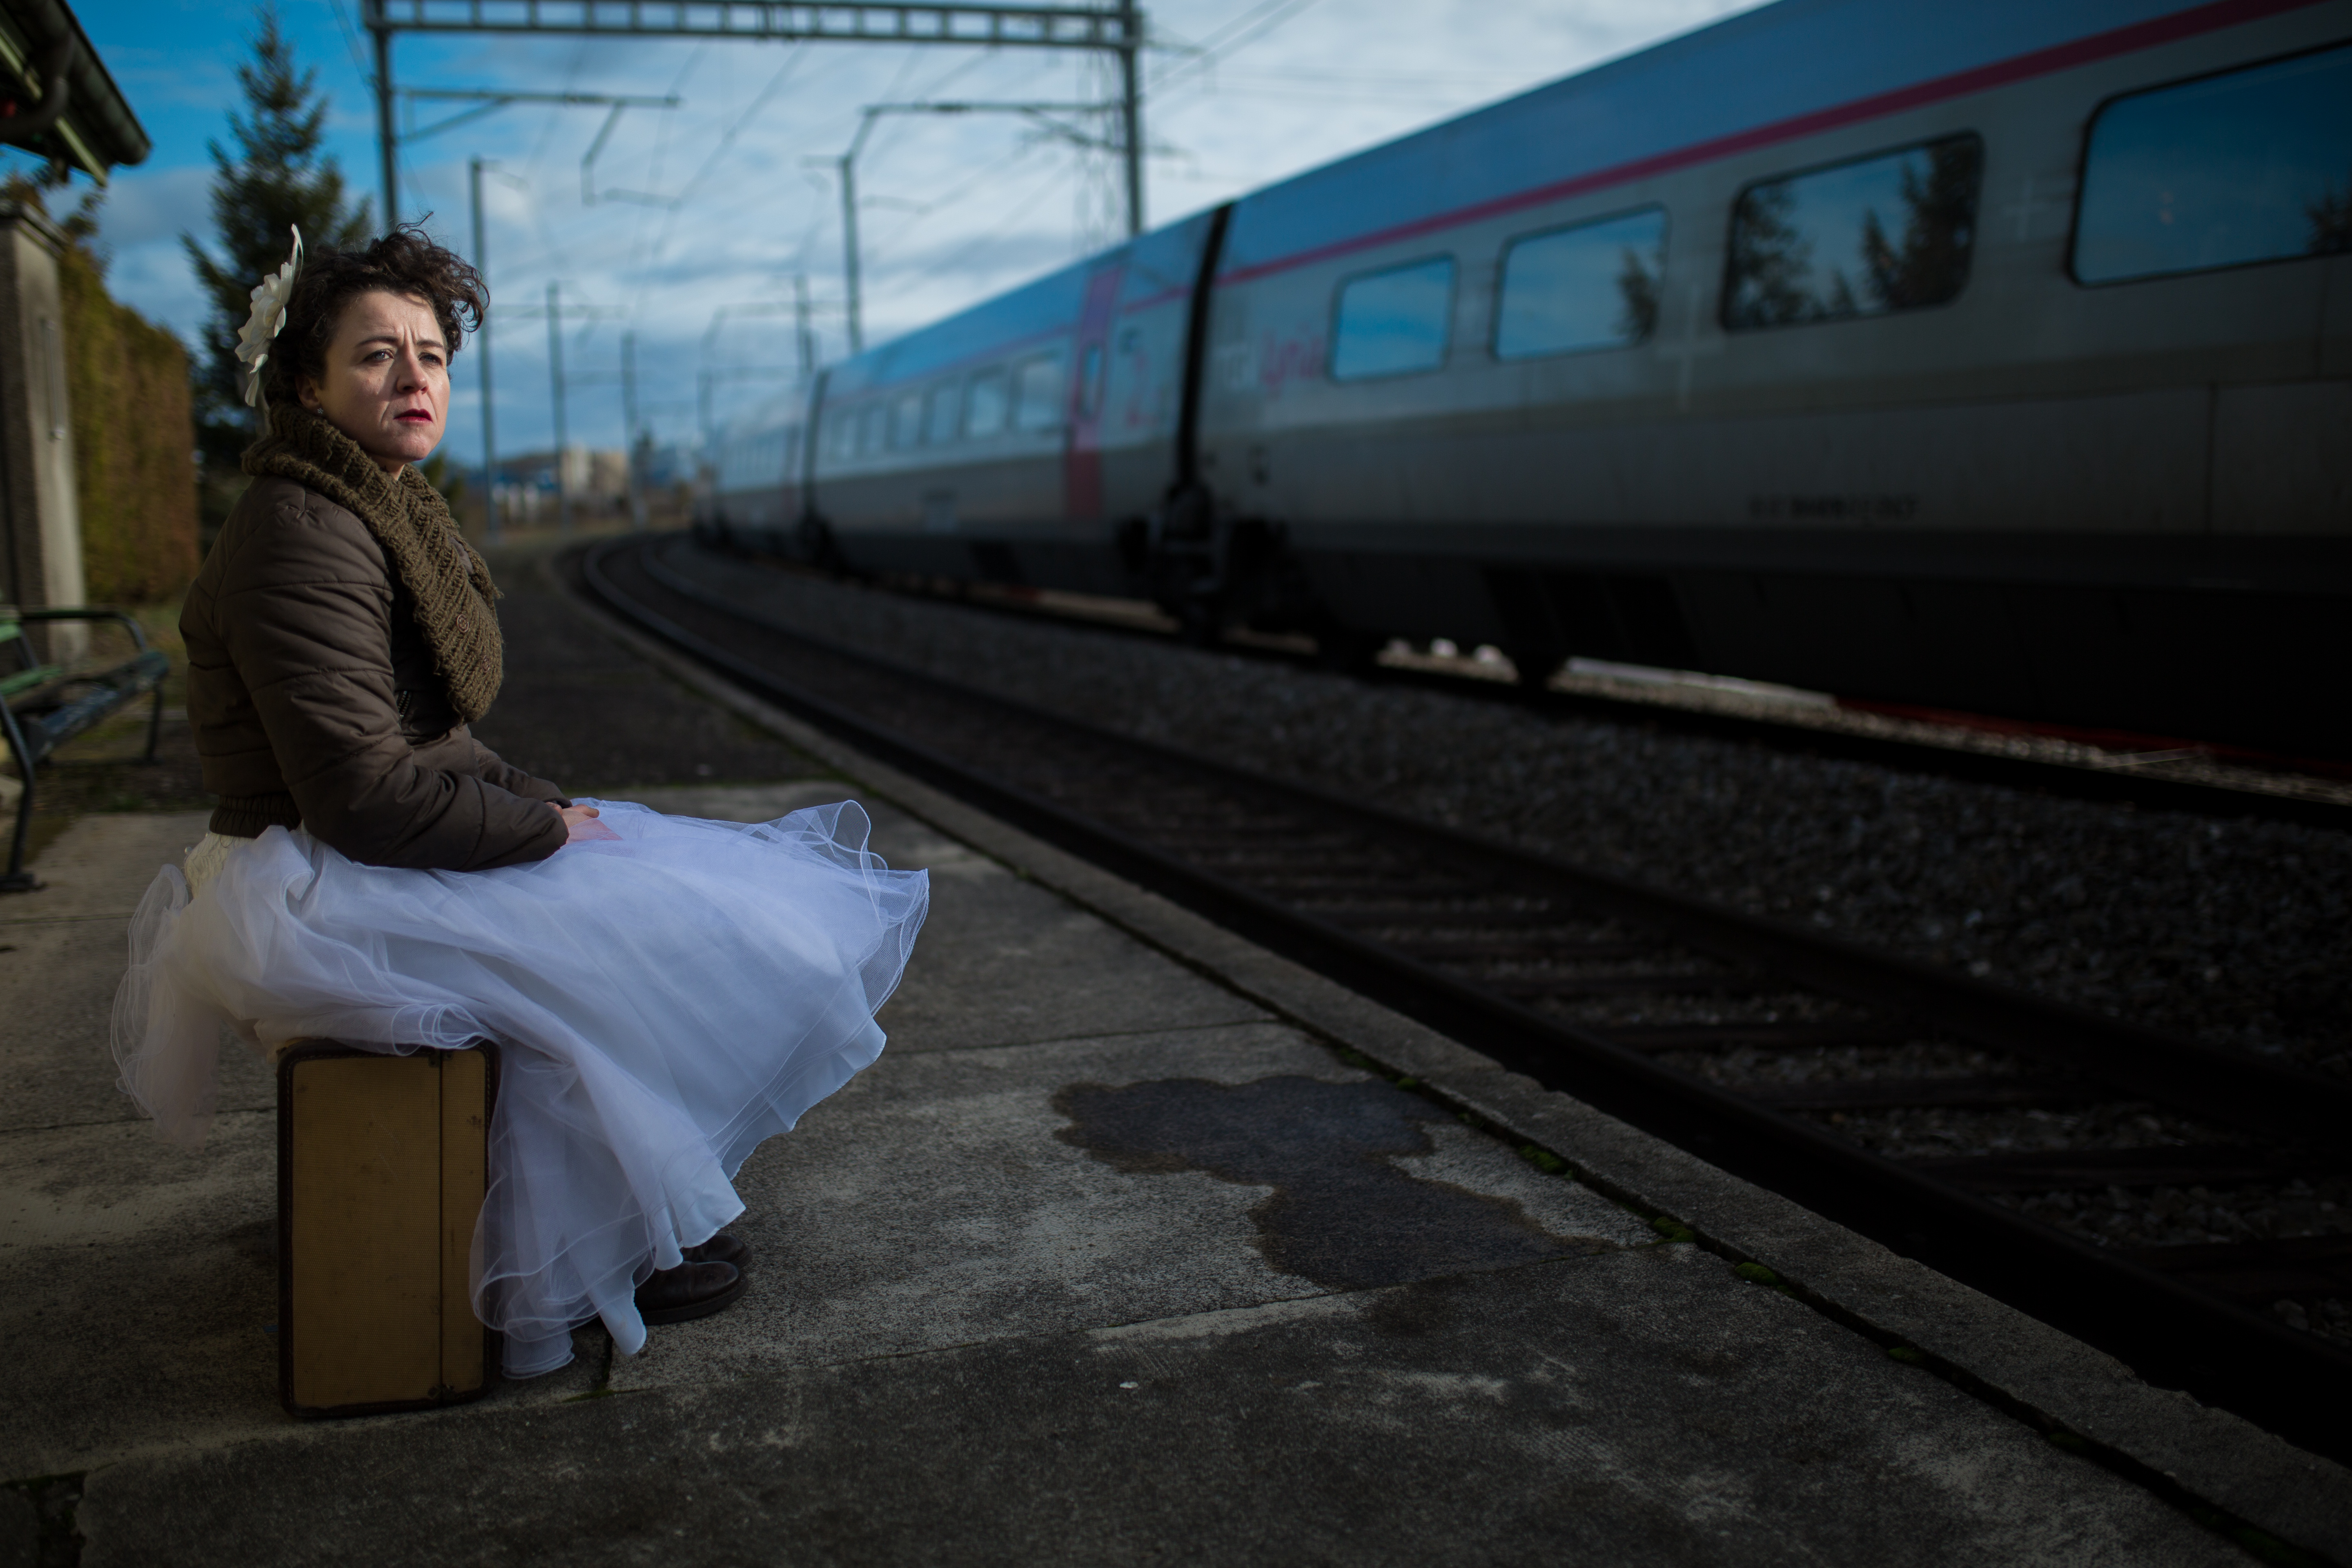 a woman in a wedding dress sits on a suitcase as a train passes